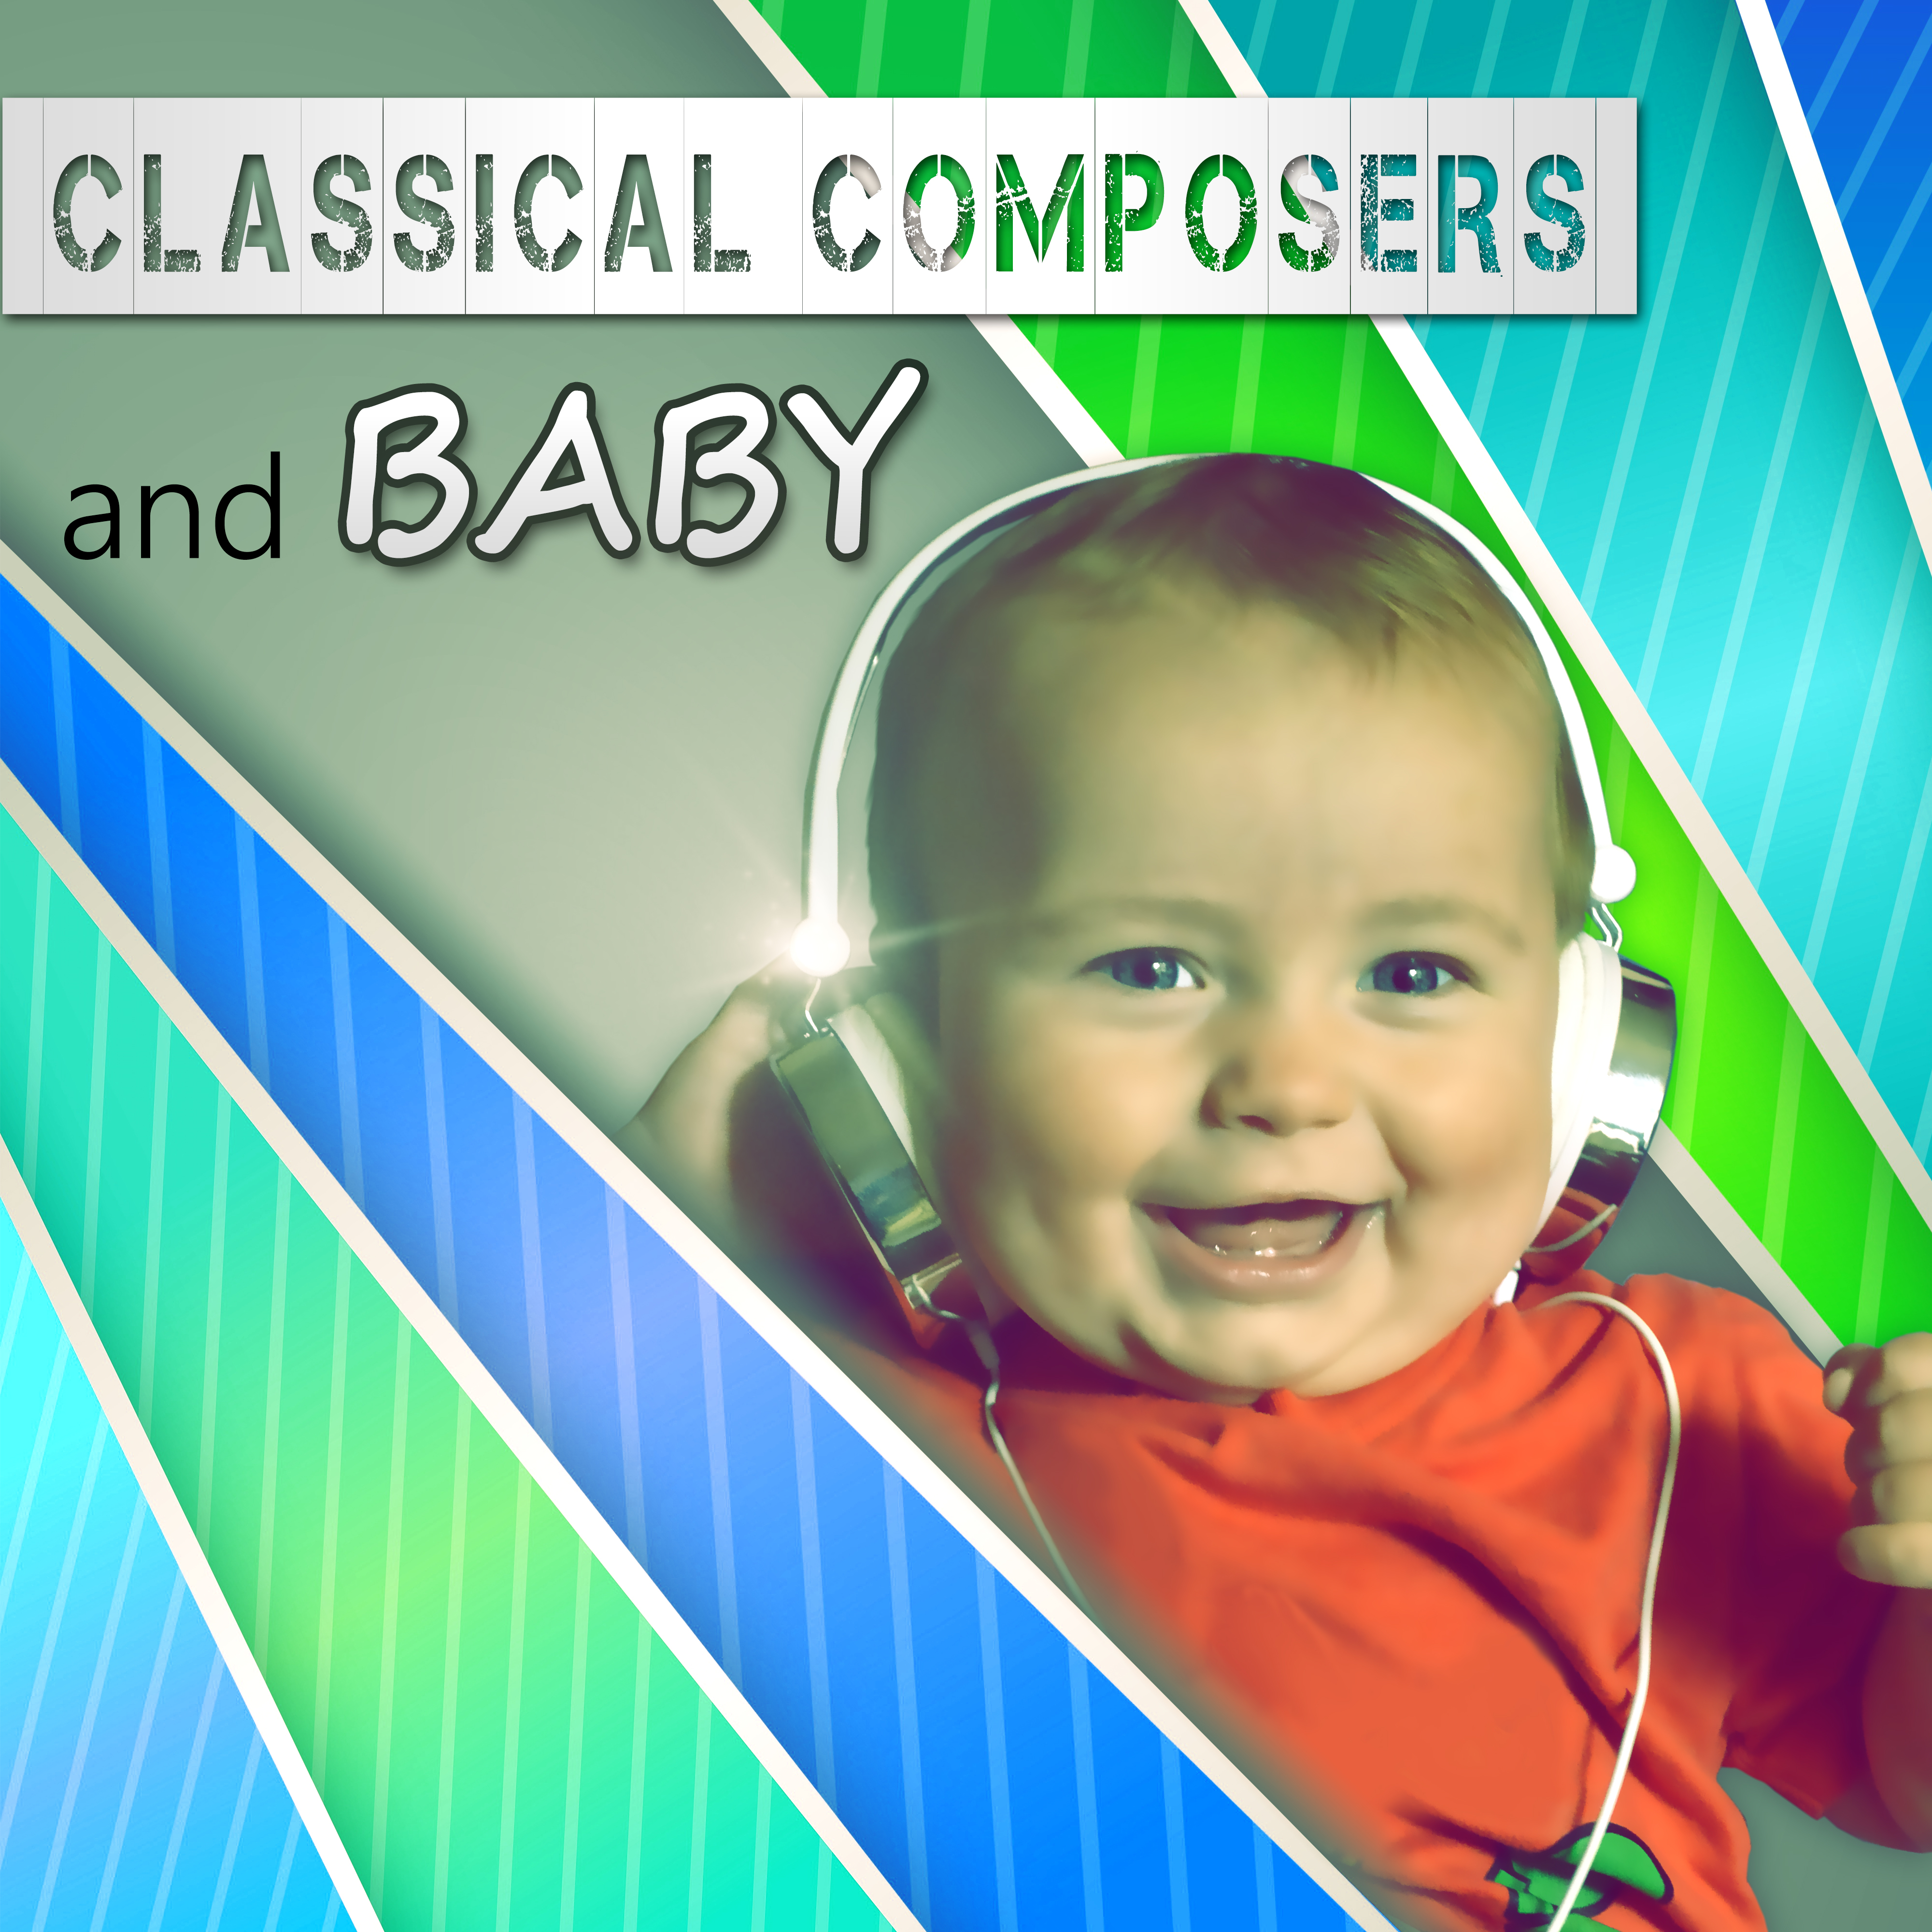 Classical Composers and Baby – Quiet Lullaby, Sweet Melody to Sleep, Classical Music for Babies, Classical Bedtime, Mozart, Bach, Beethoven